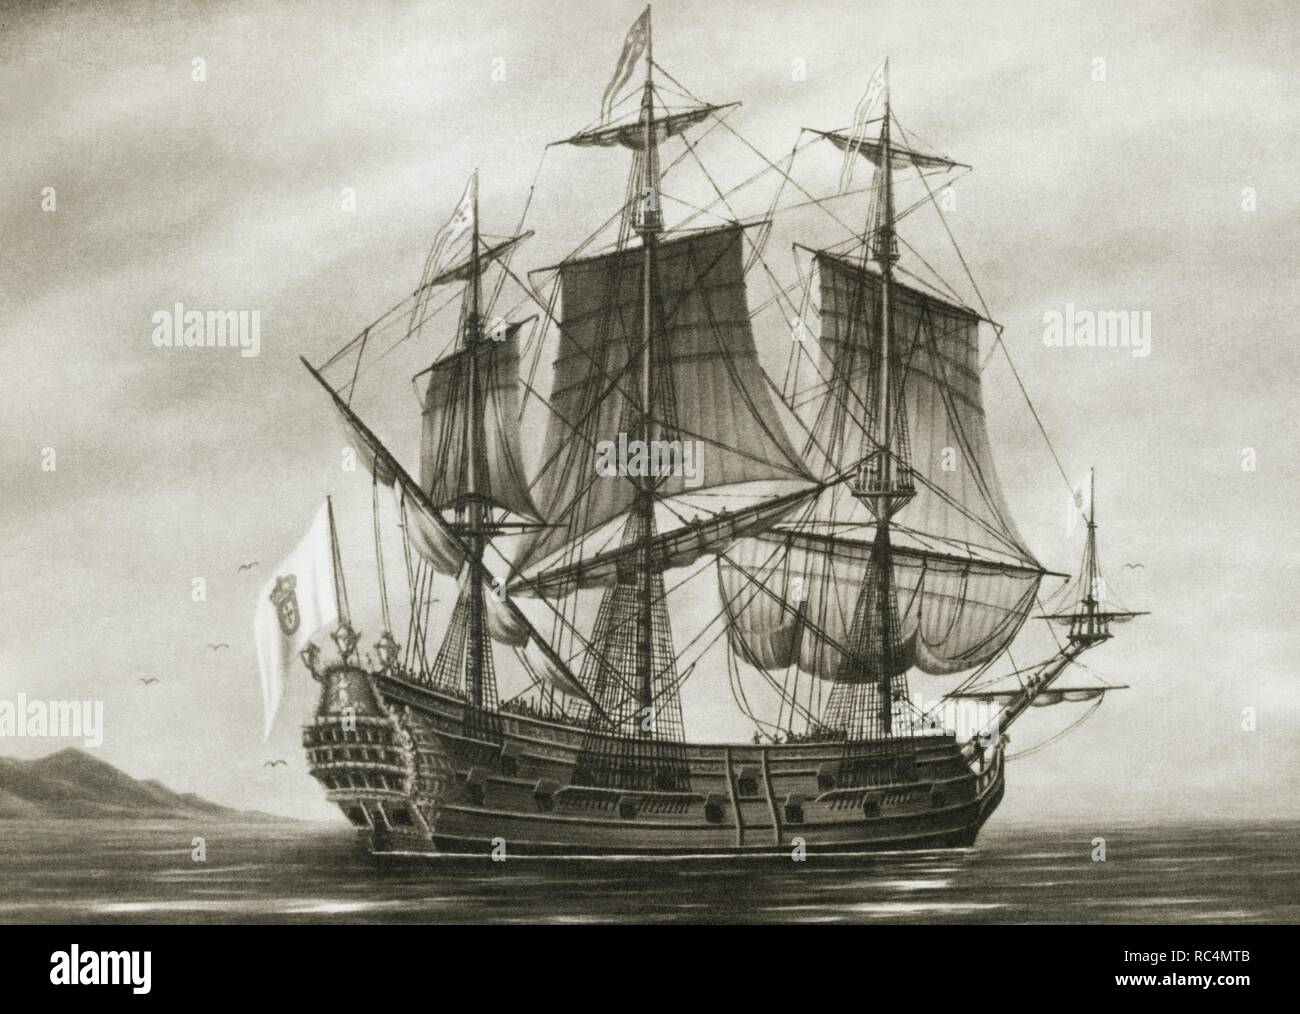 Galleon Saint Lucia. 17th century. The Grand Duke Ferdinand I of Tuscany in 1608 organized an expedition to northern Brazil, commanded by English captain Robert Thornton, to establish colony  in America. Engraving. Stock Photo